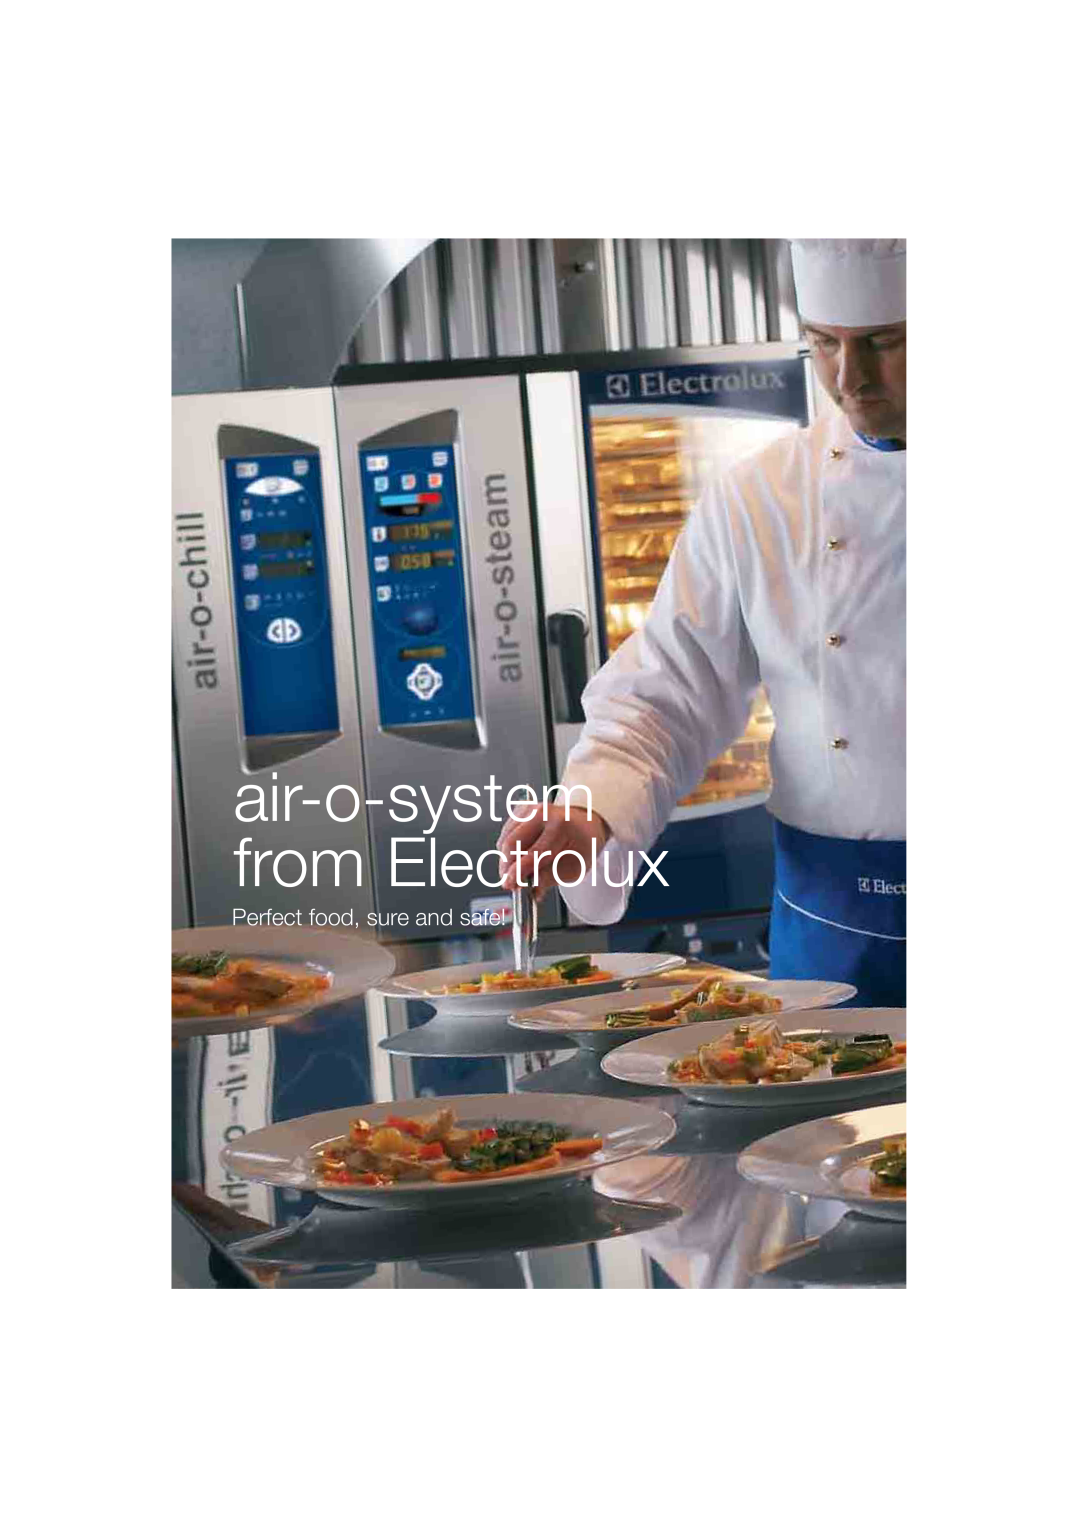 Electrolux 180 manual air-o-system from Electrolux, Perfect food, sure and safe 